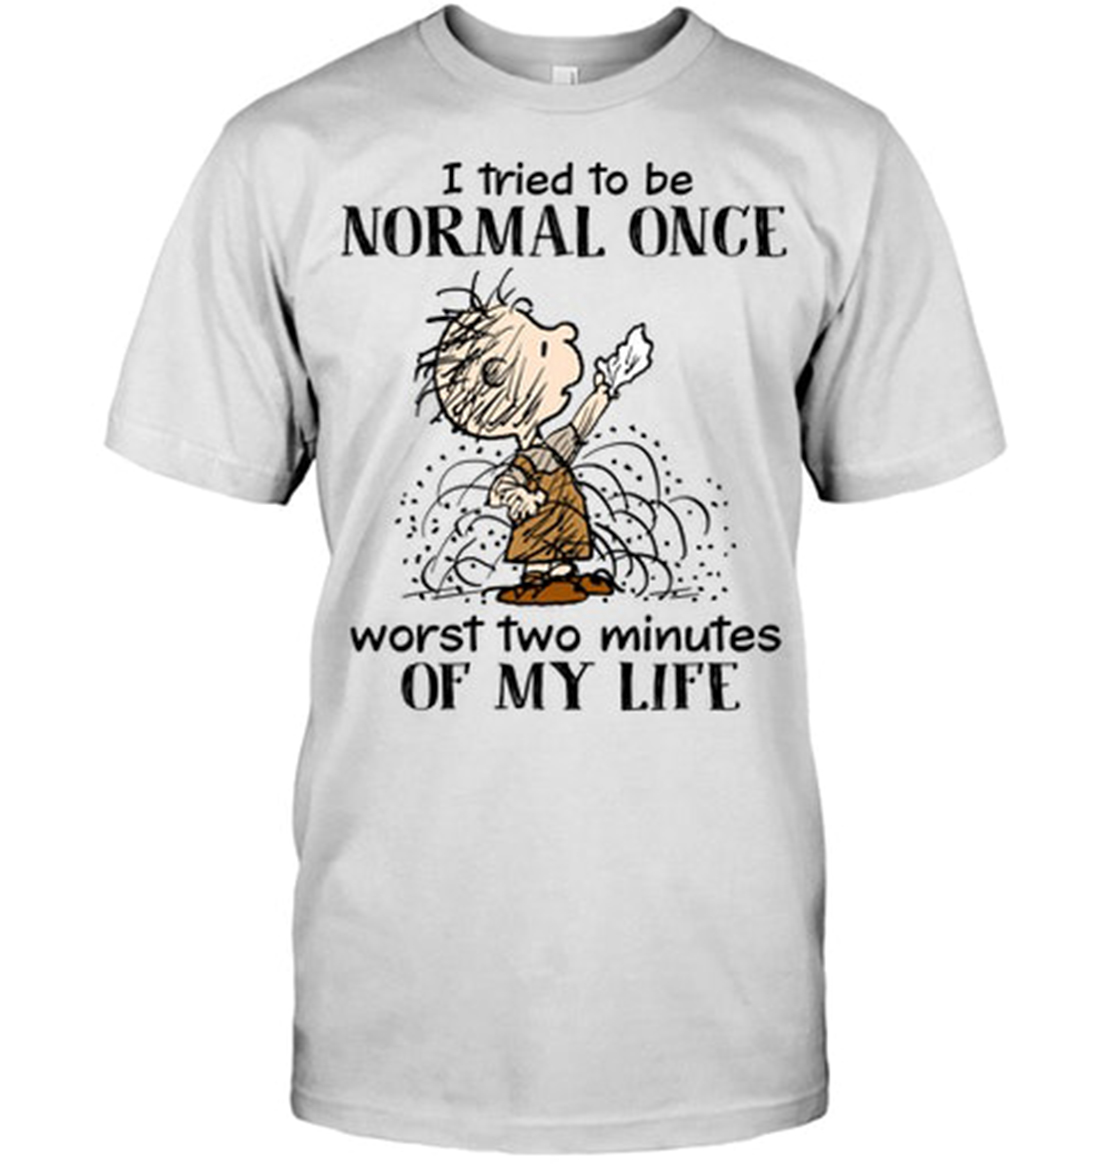 Peanuts Pig-Pen I tried to be normal once worst two minutes of my life shirt, v-neck and tank top